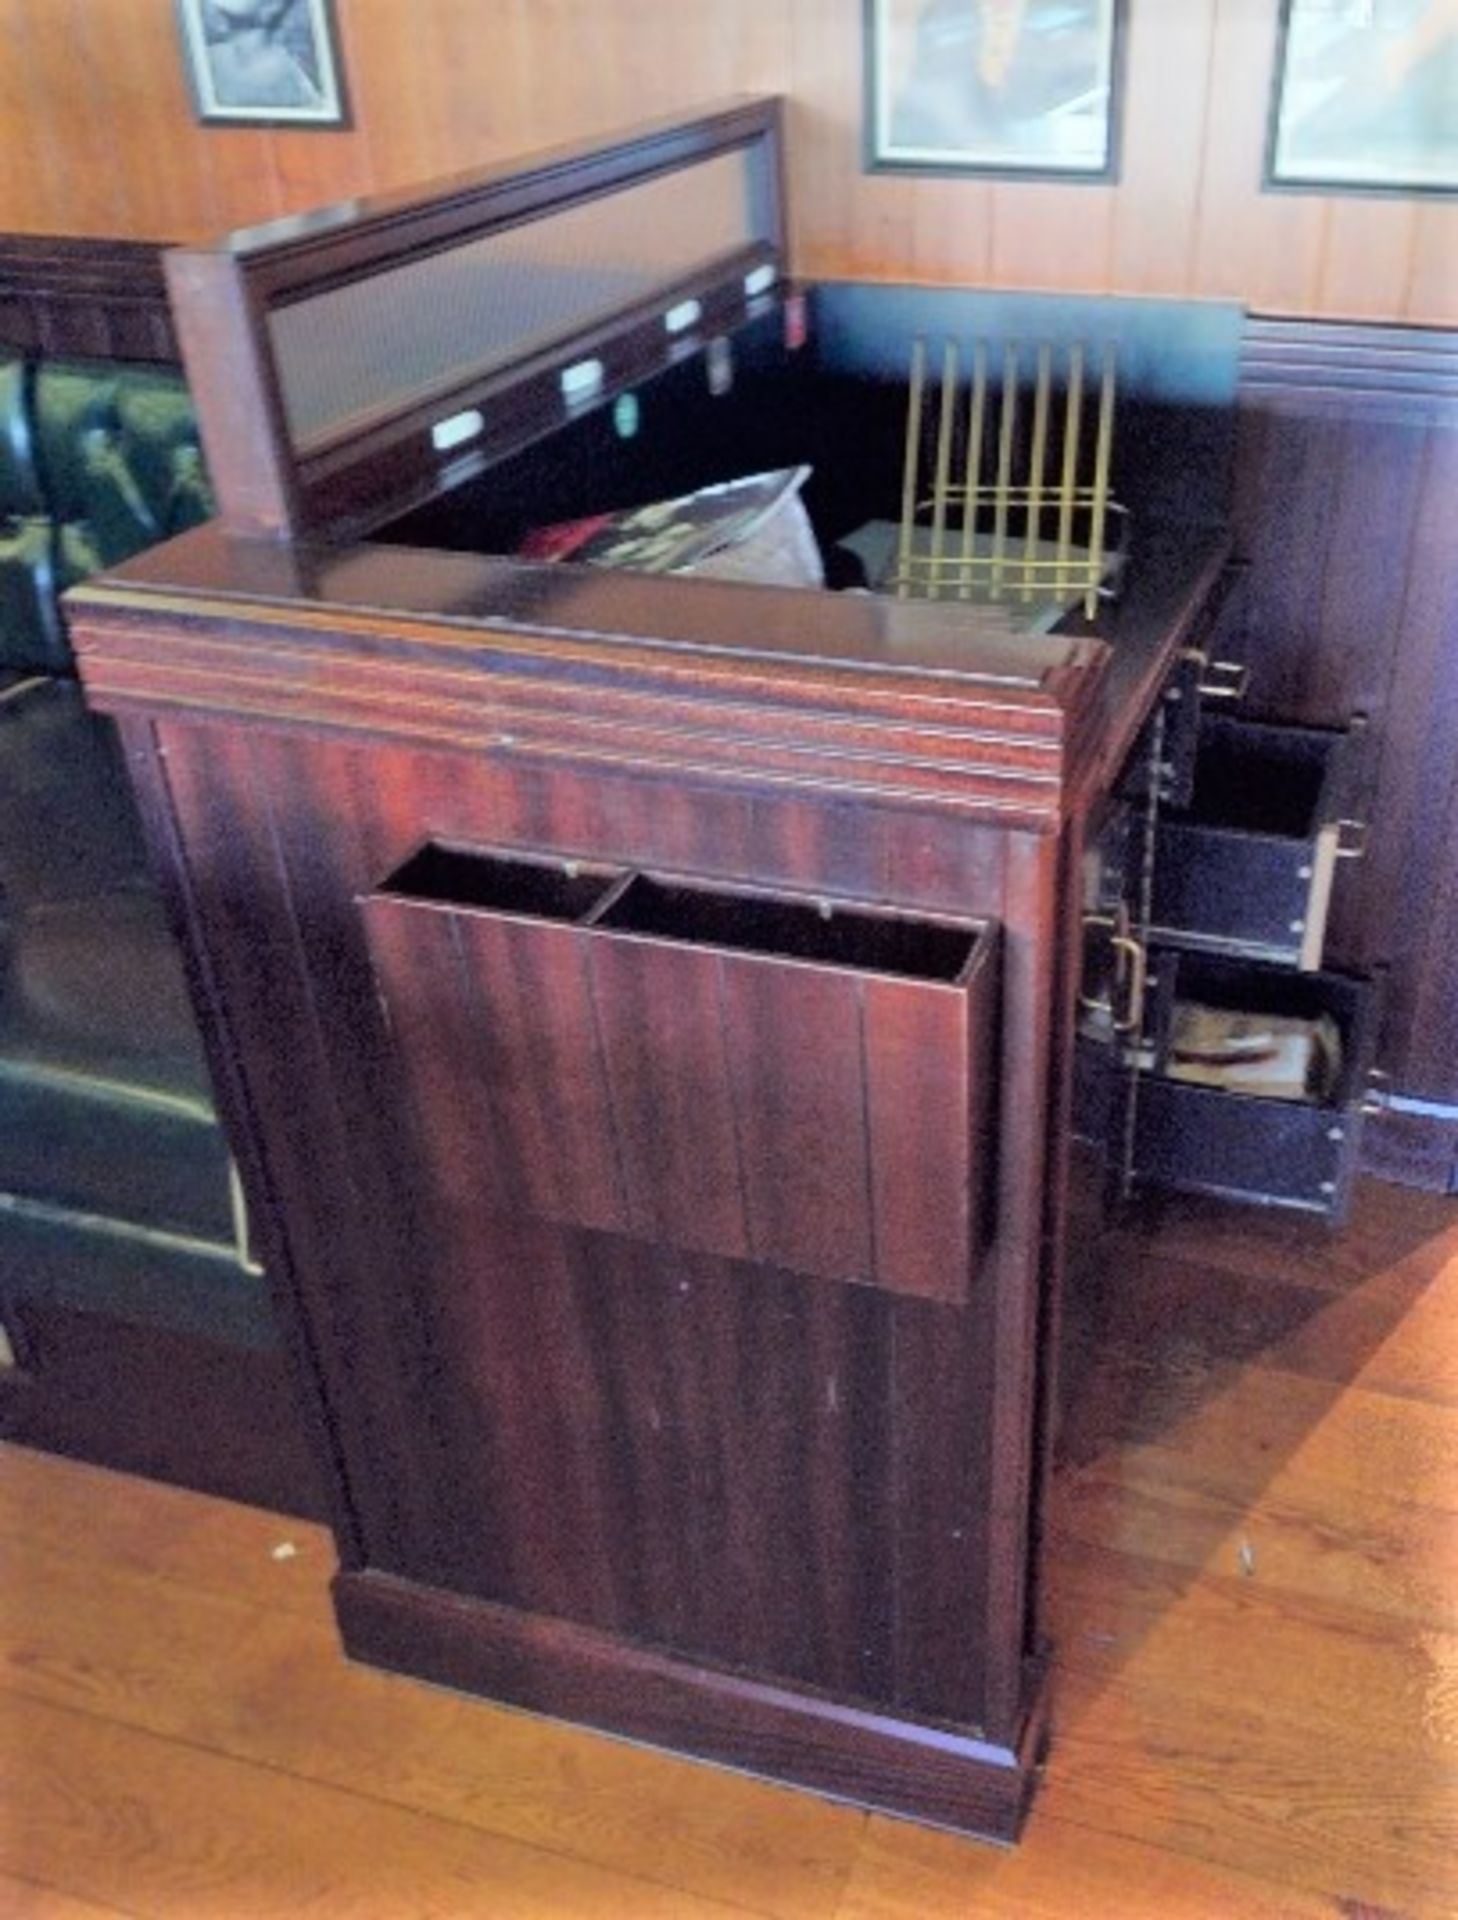 2 x Waiter Stations Featuring a Dark Wooden Finish, Menu Holders, Privacy Panels and Cupboards -